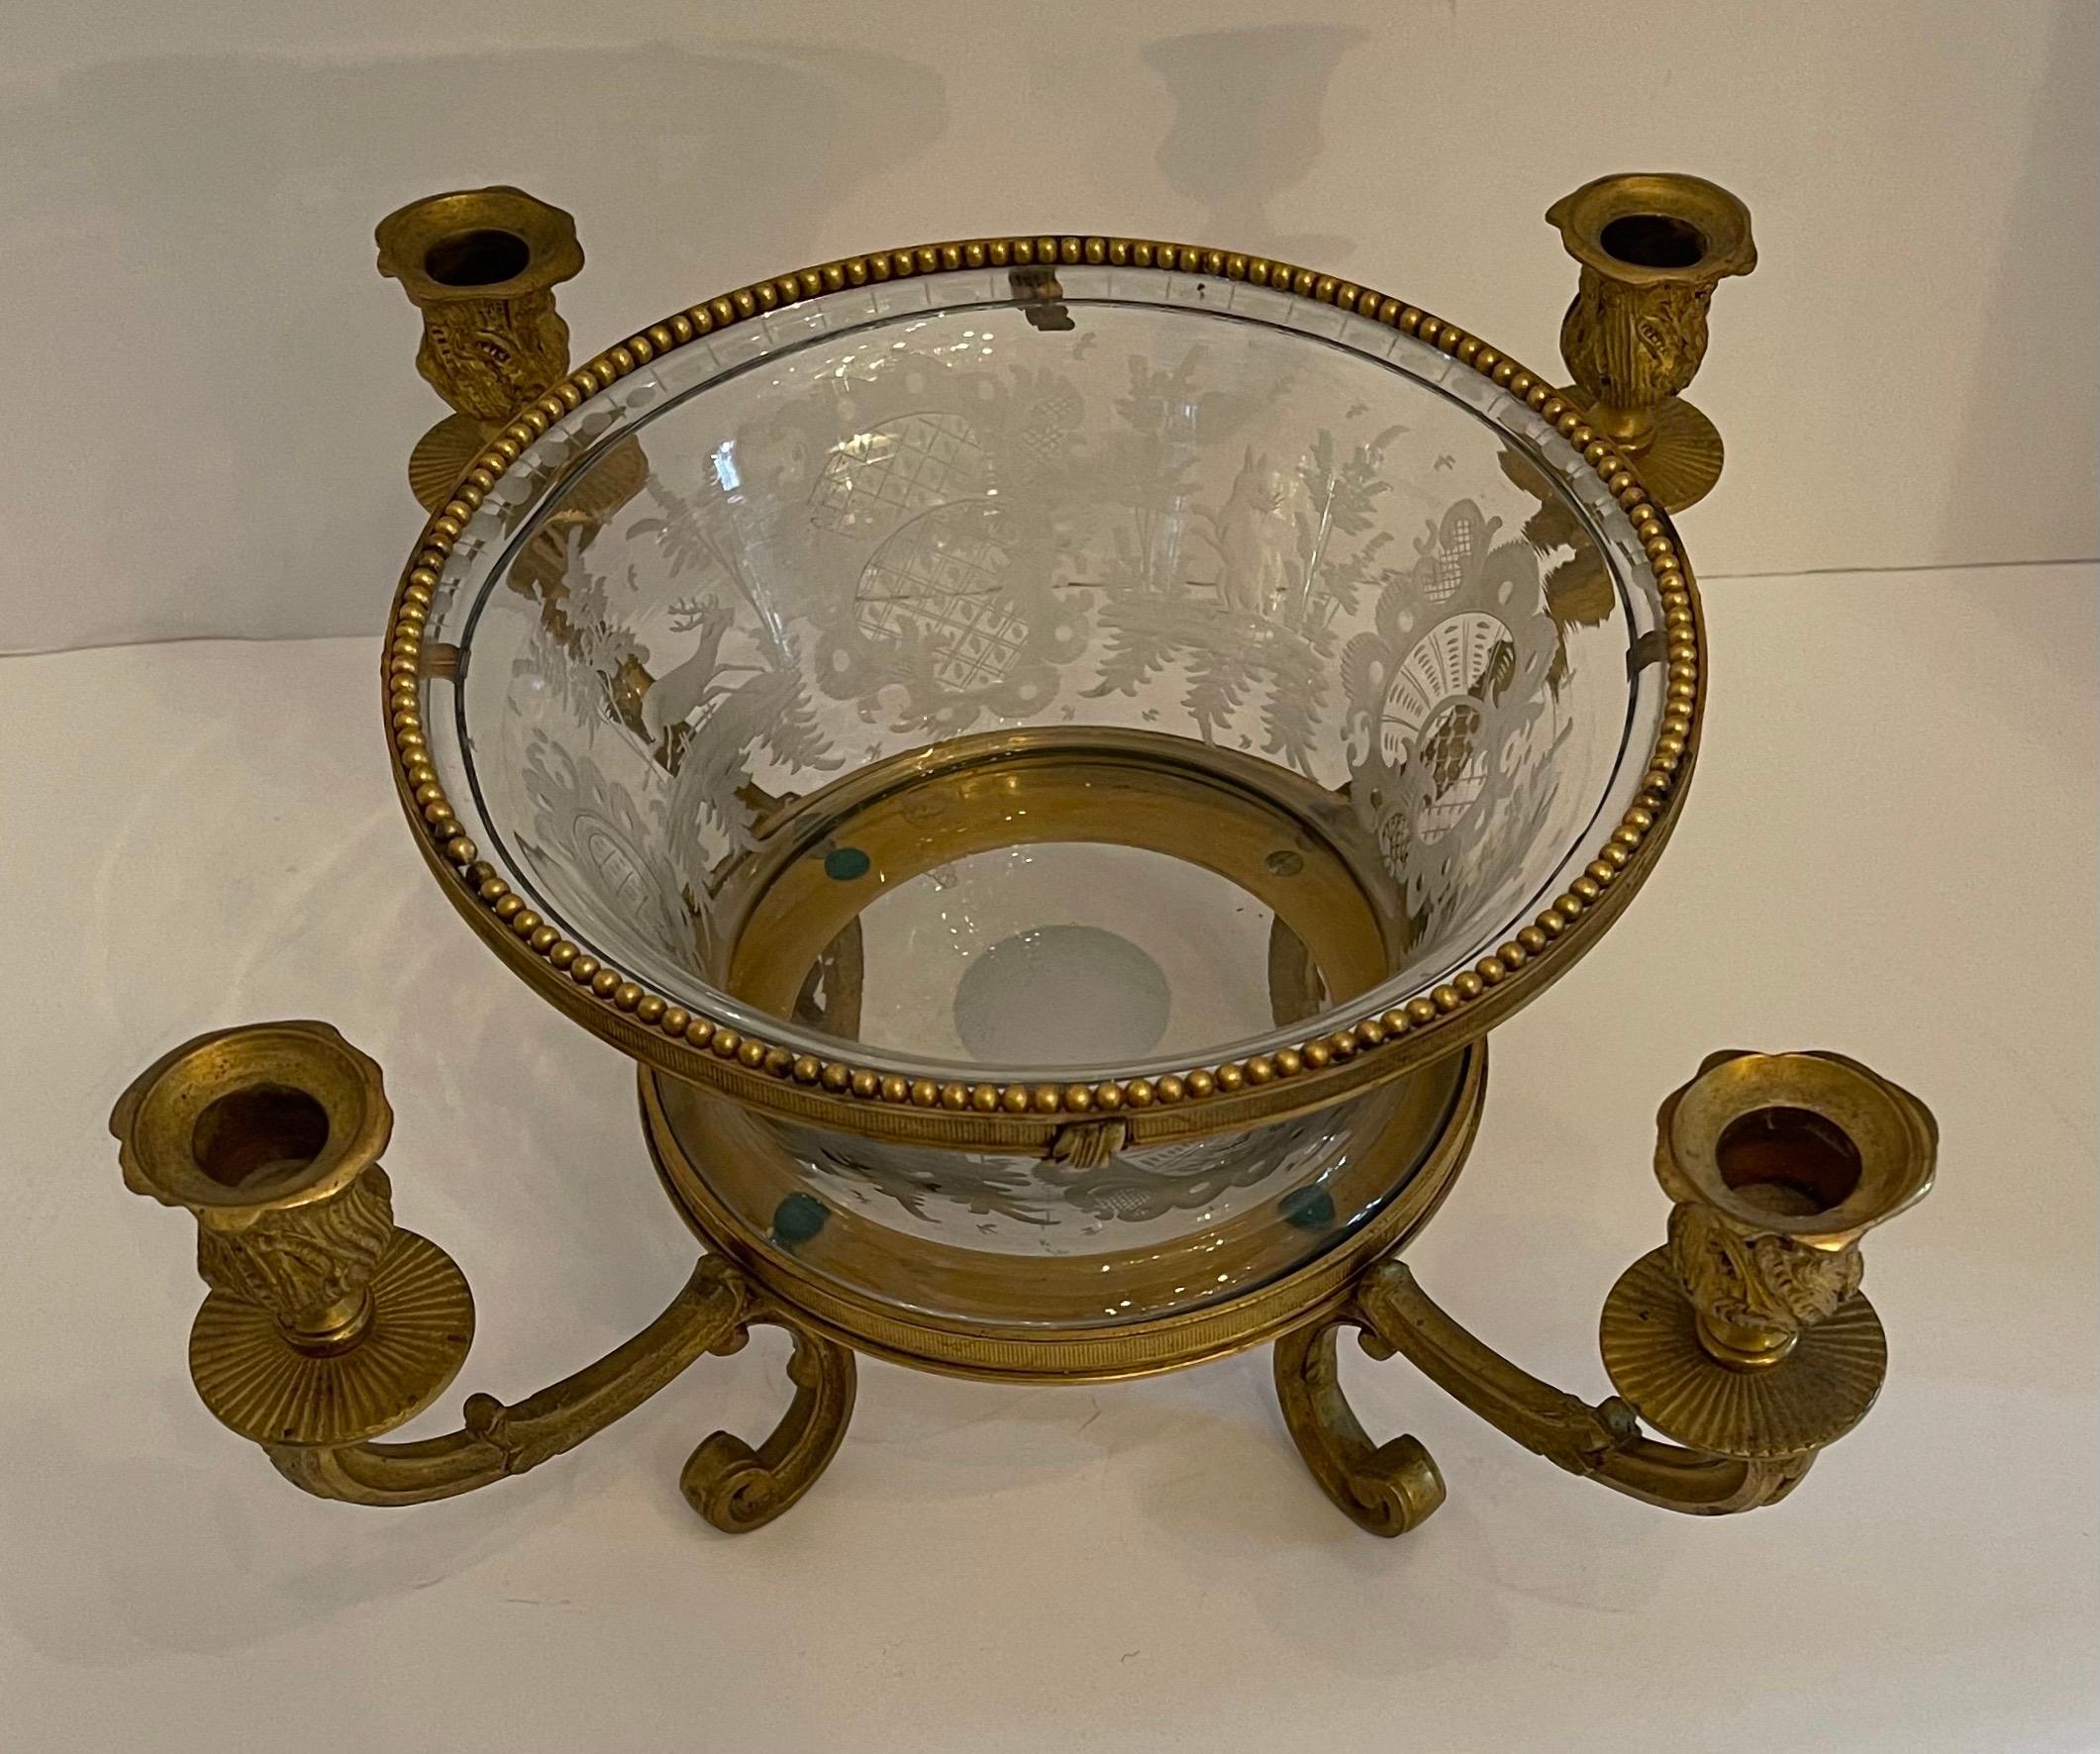 A fine French ormolu mounted etched cut crystal & chased doré bronze candelabra centerpiece bowl in the manner of Baccarat.